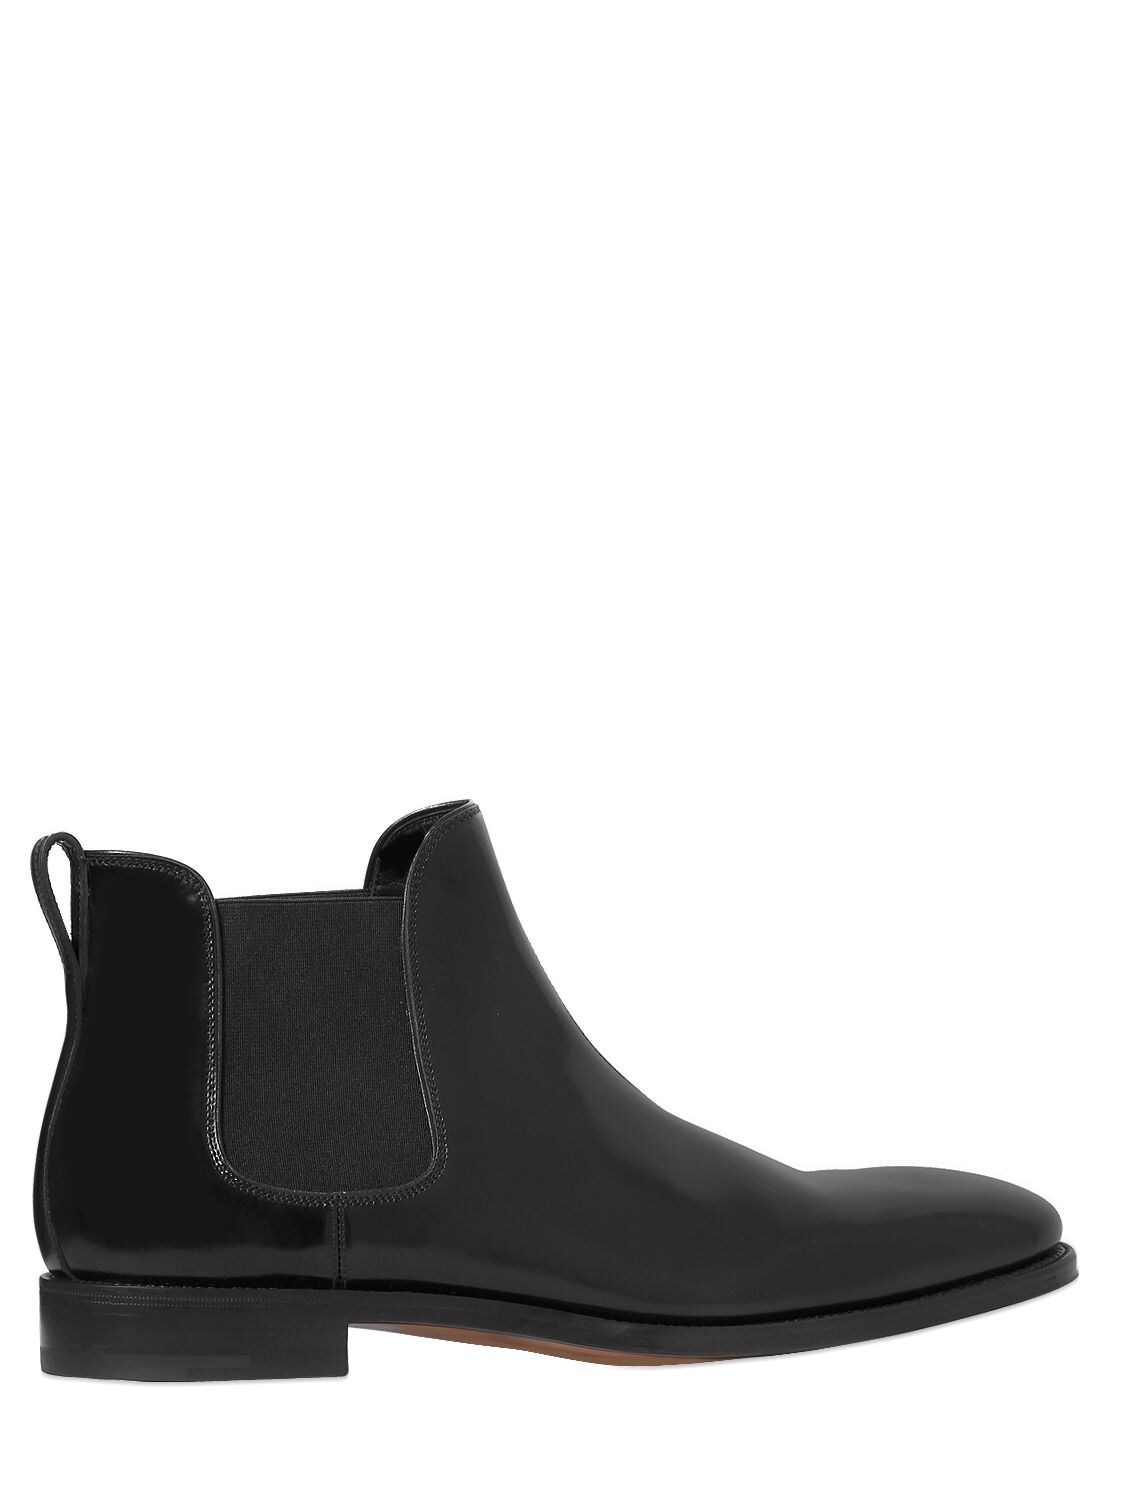 GIOTTO LEATHER CHELSEA BOOTS